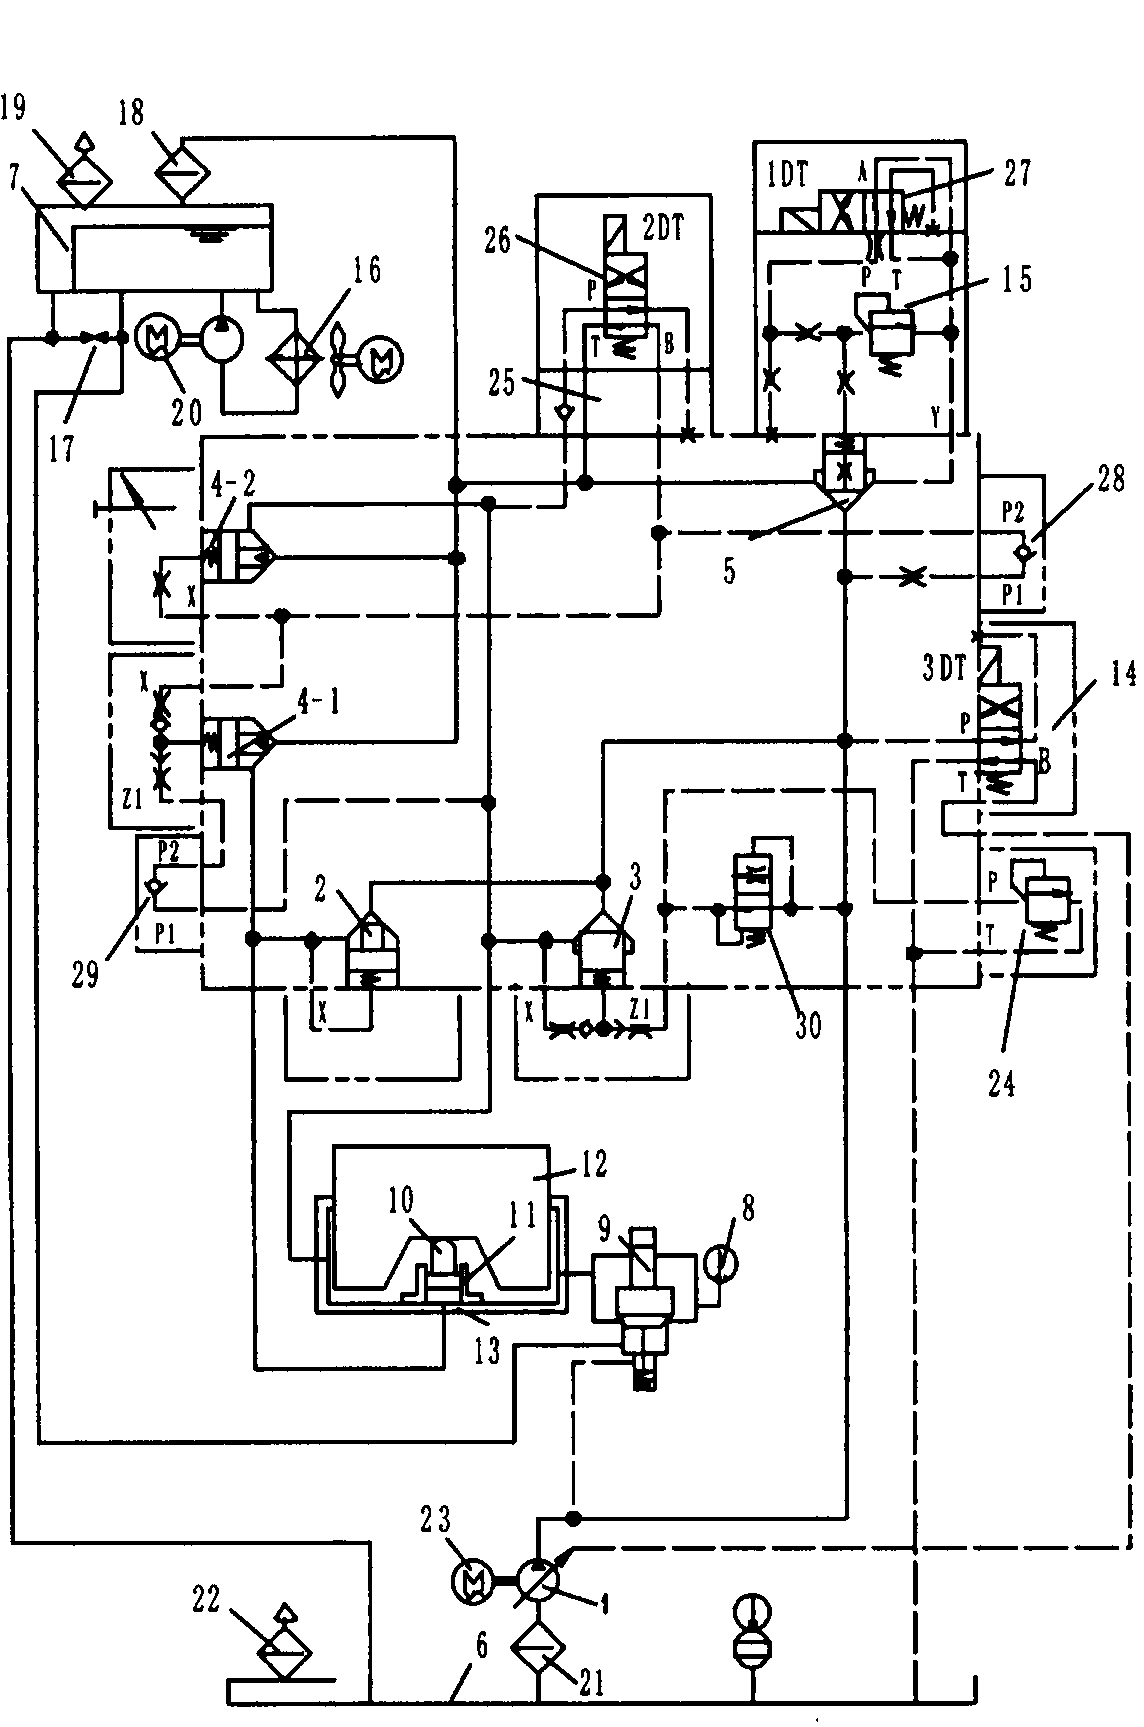 Hydraulic transmission and control system for press machine